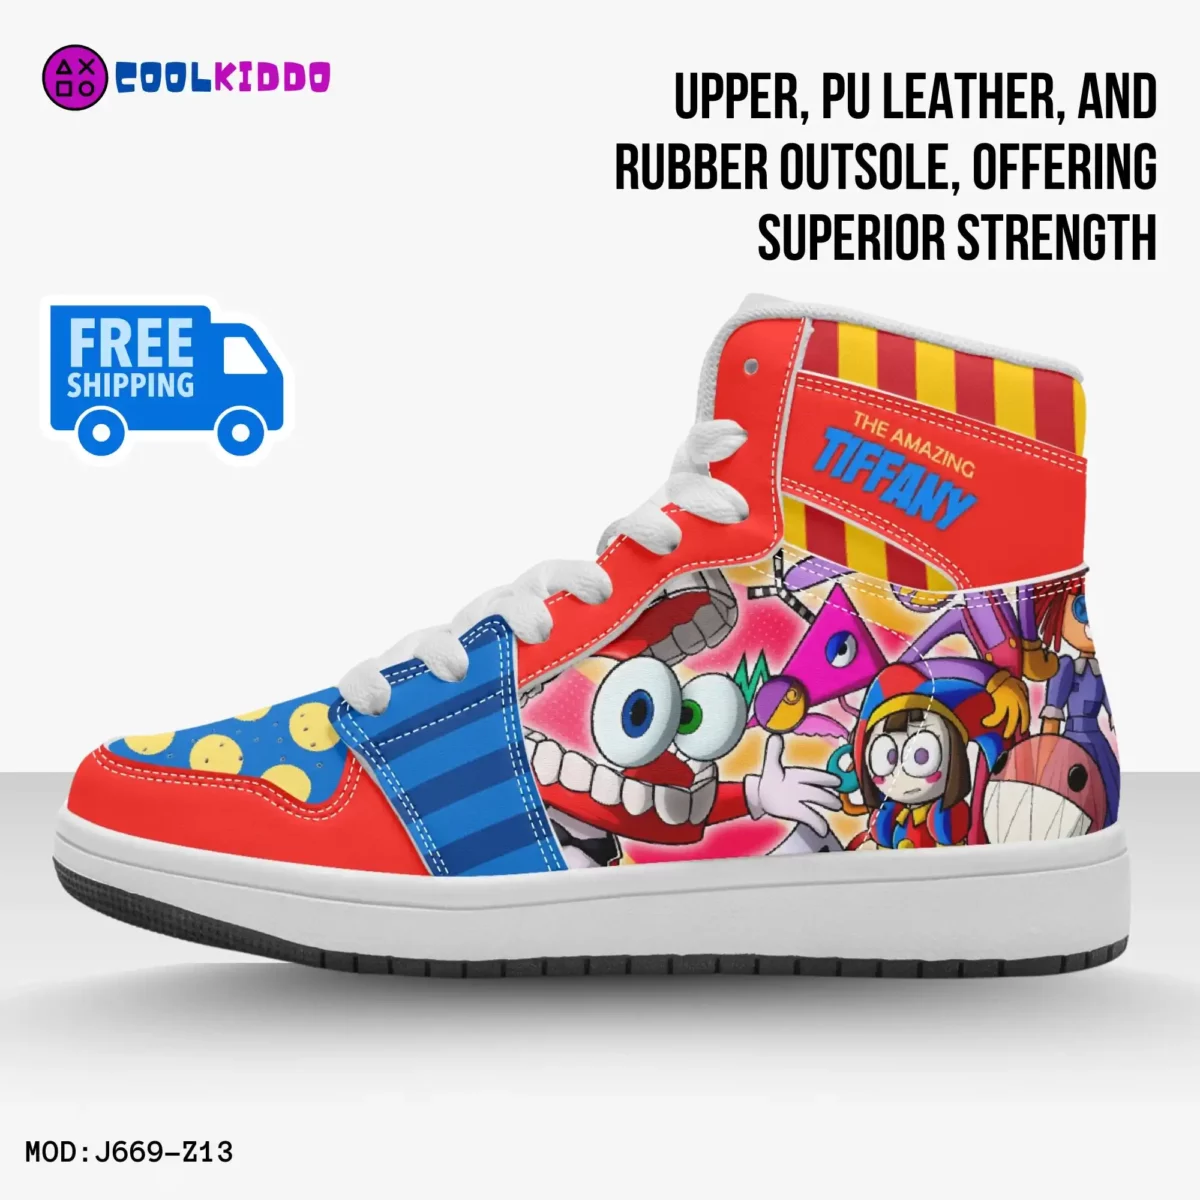 Personalized Name The Amazing Digital Circus Inspired High-Top Shoes, Leather Sneakers for Kids Cool Kiddo 12